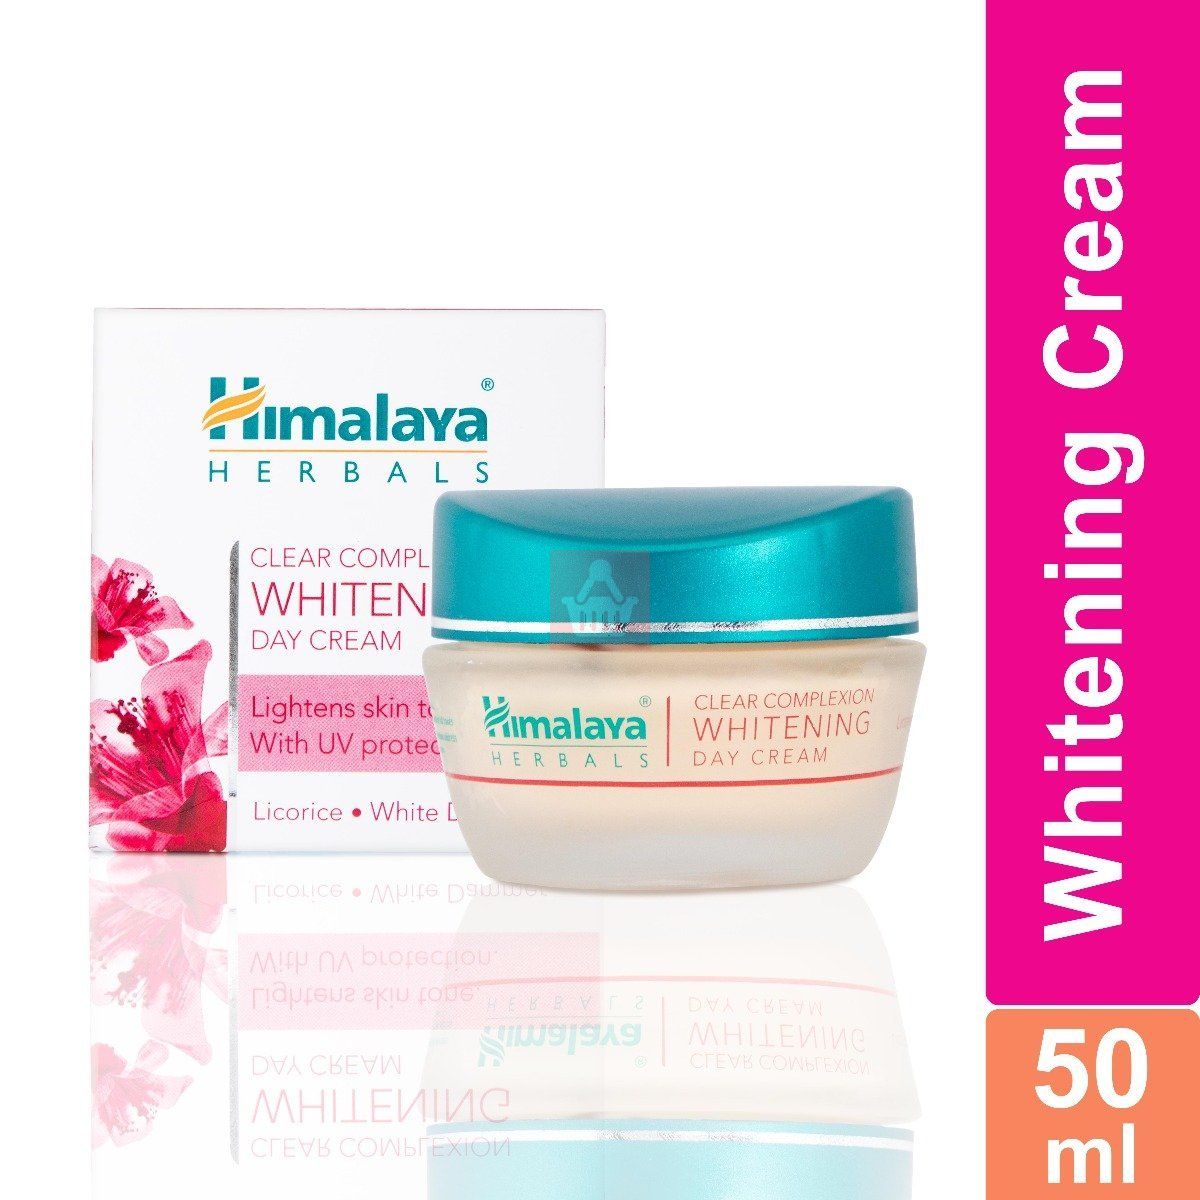 Himalaya Herbals Clear Complexion Whitening Day Cream - 50gm